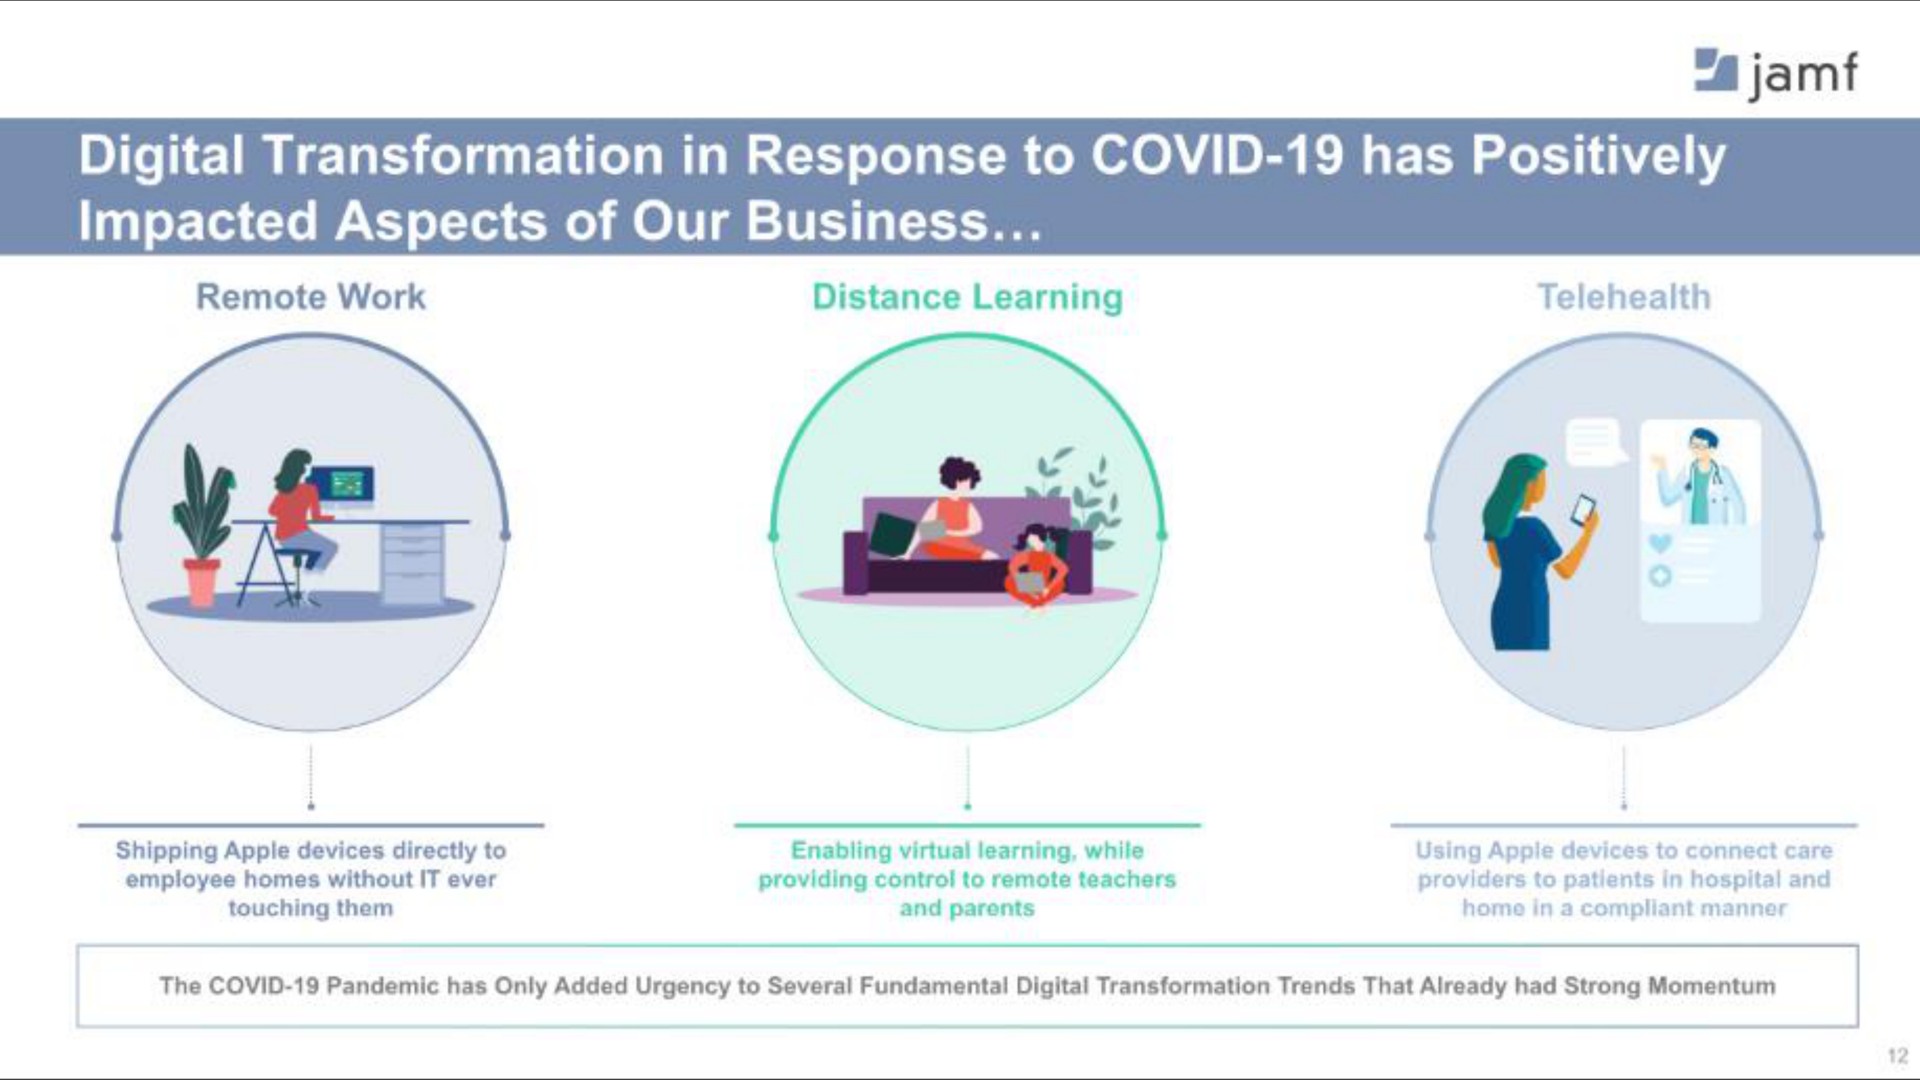 digital transformation in response to covid has positively impacted aspects of our business a | Jamf